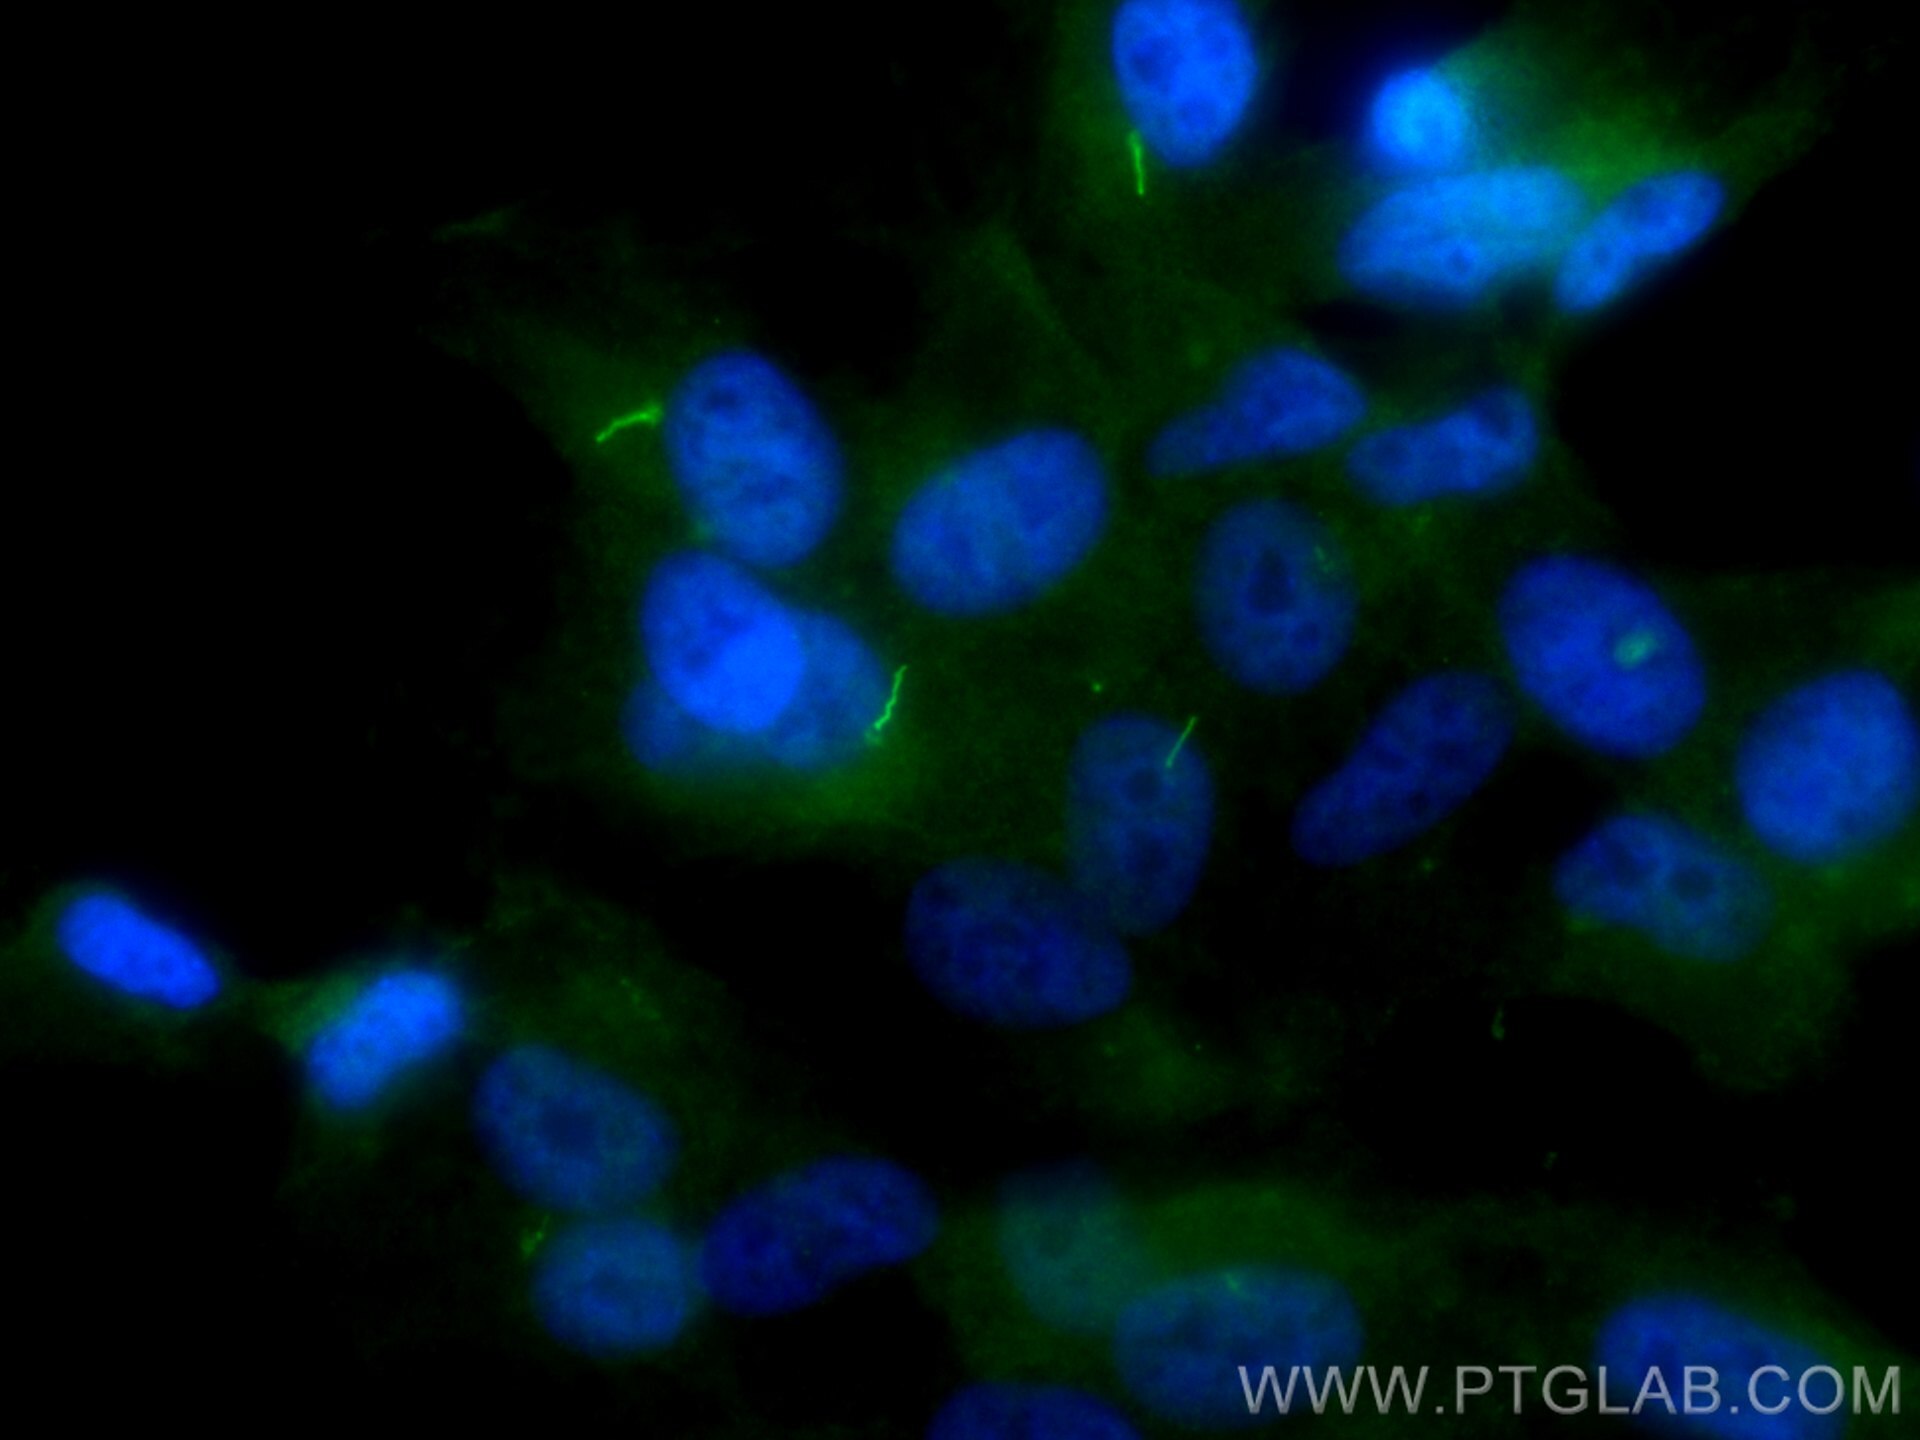 IF Staining of hTERT-RPE1 using 17711-1-AP